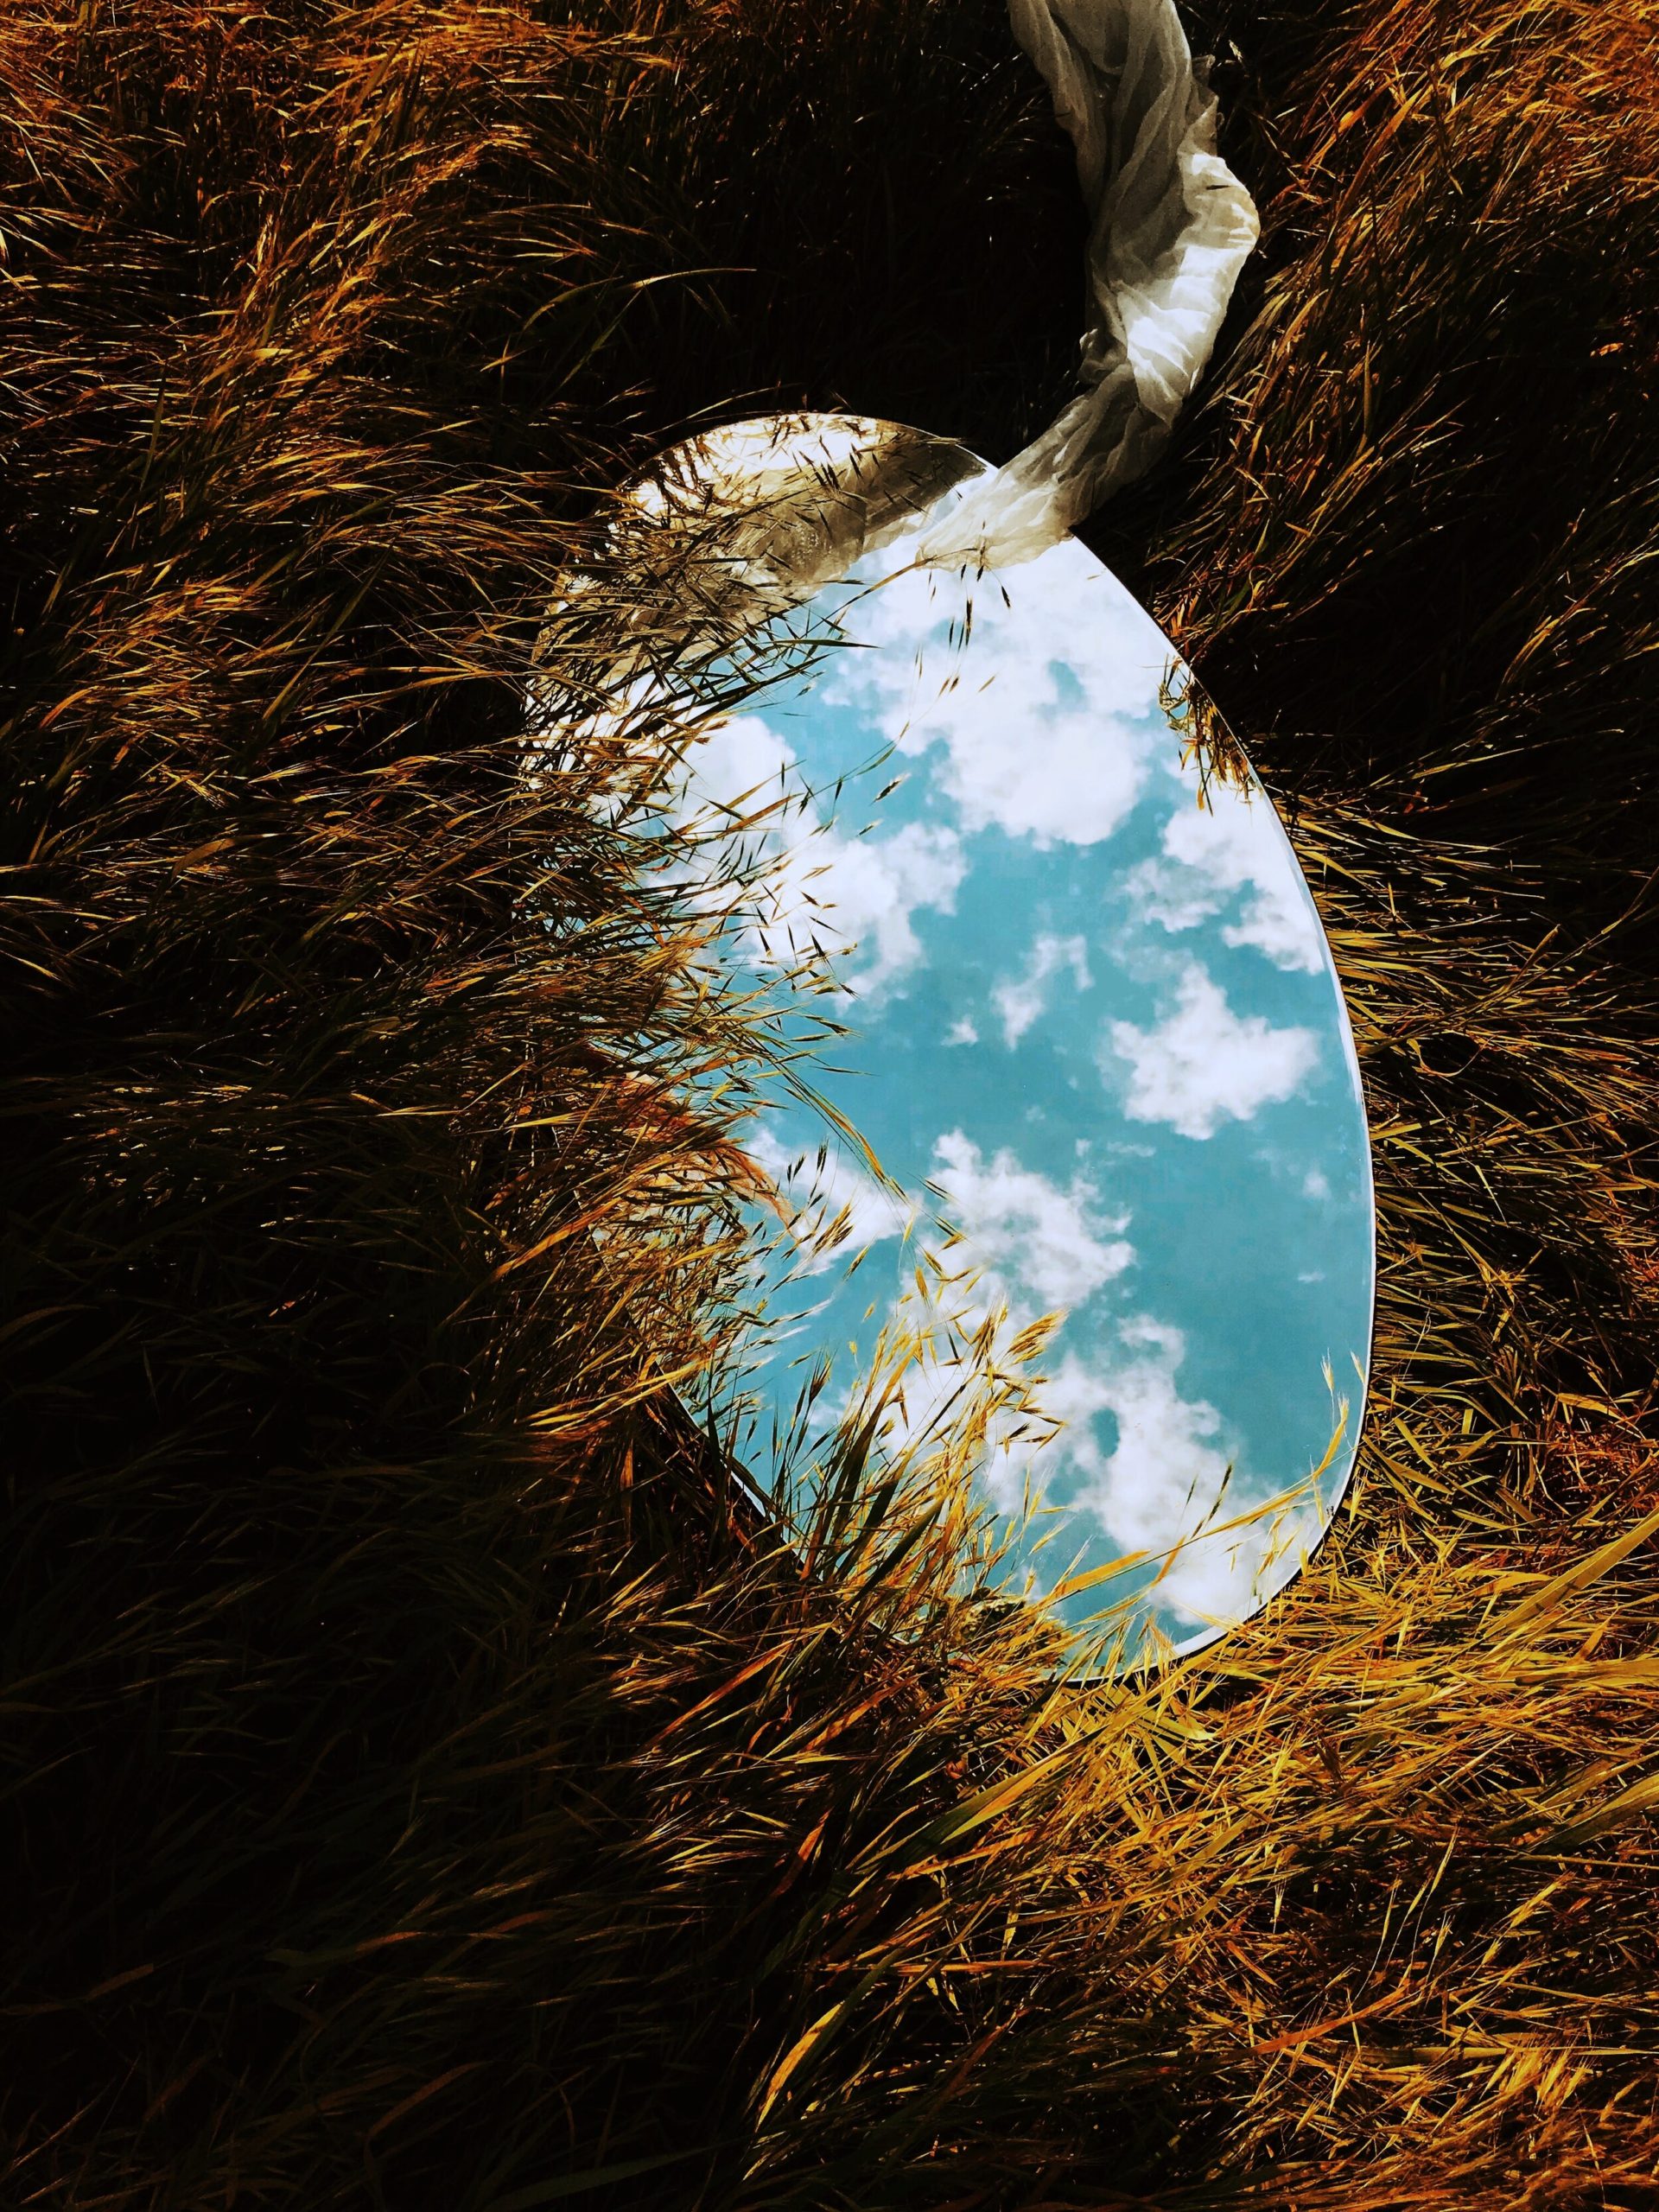 Cover image for “Guilt as a Mirror”